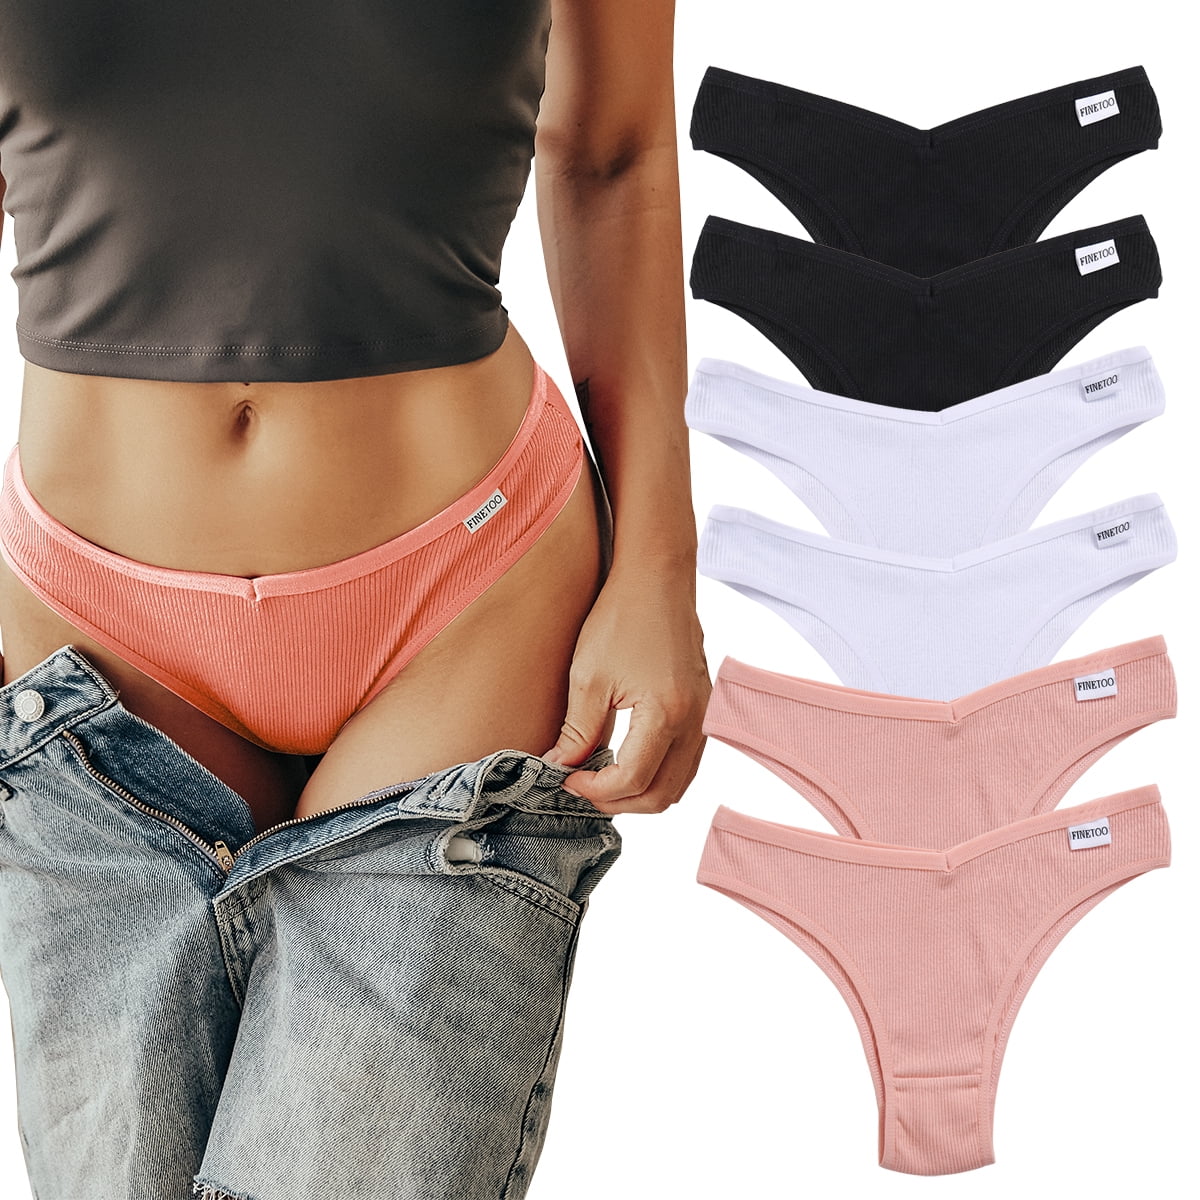 Emprella Women's Underwear Thong Panties - 8 Pack Colors and Patterns